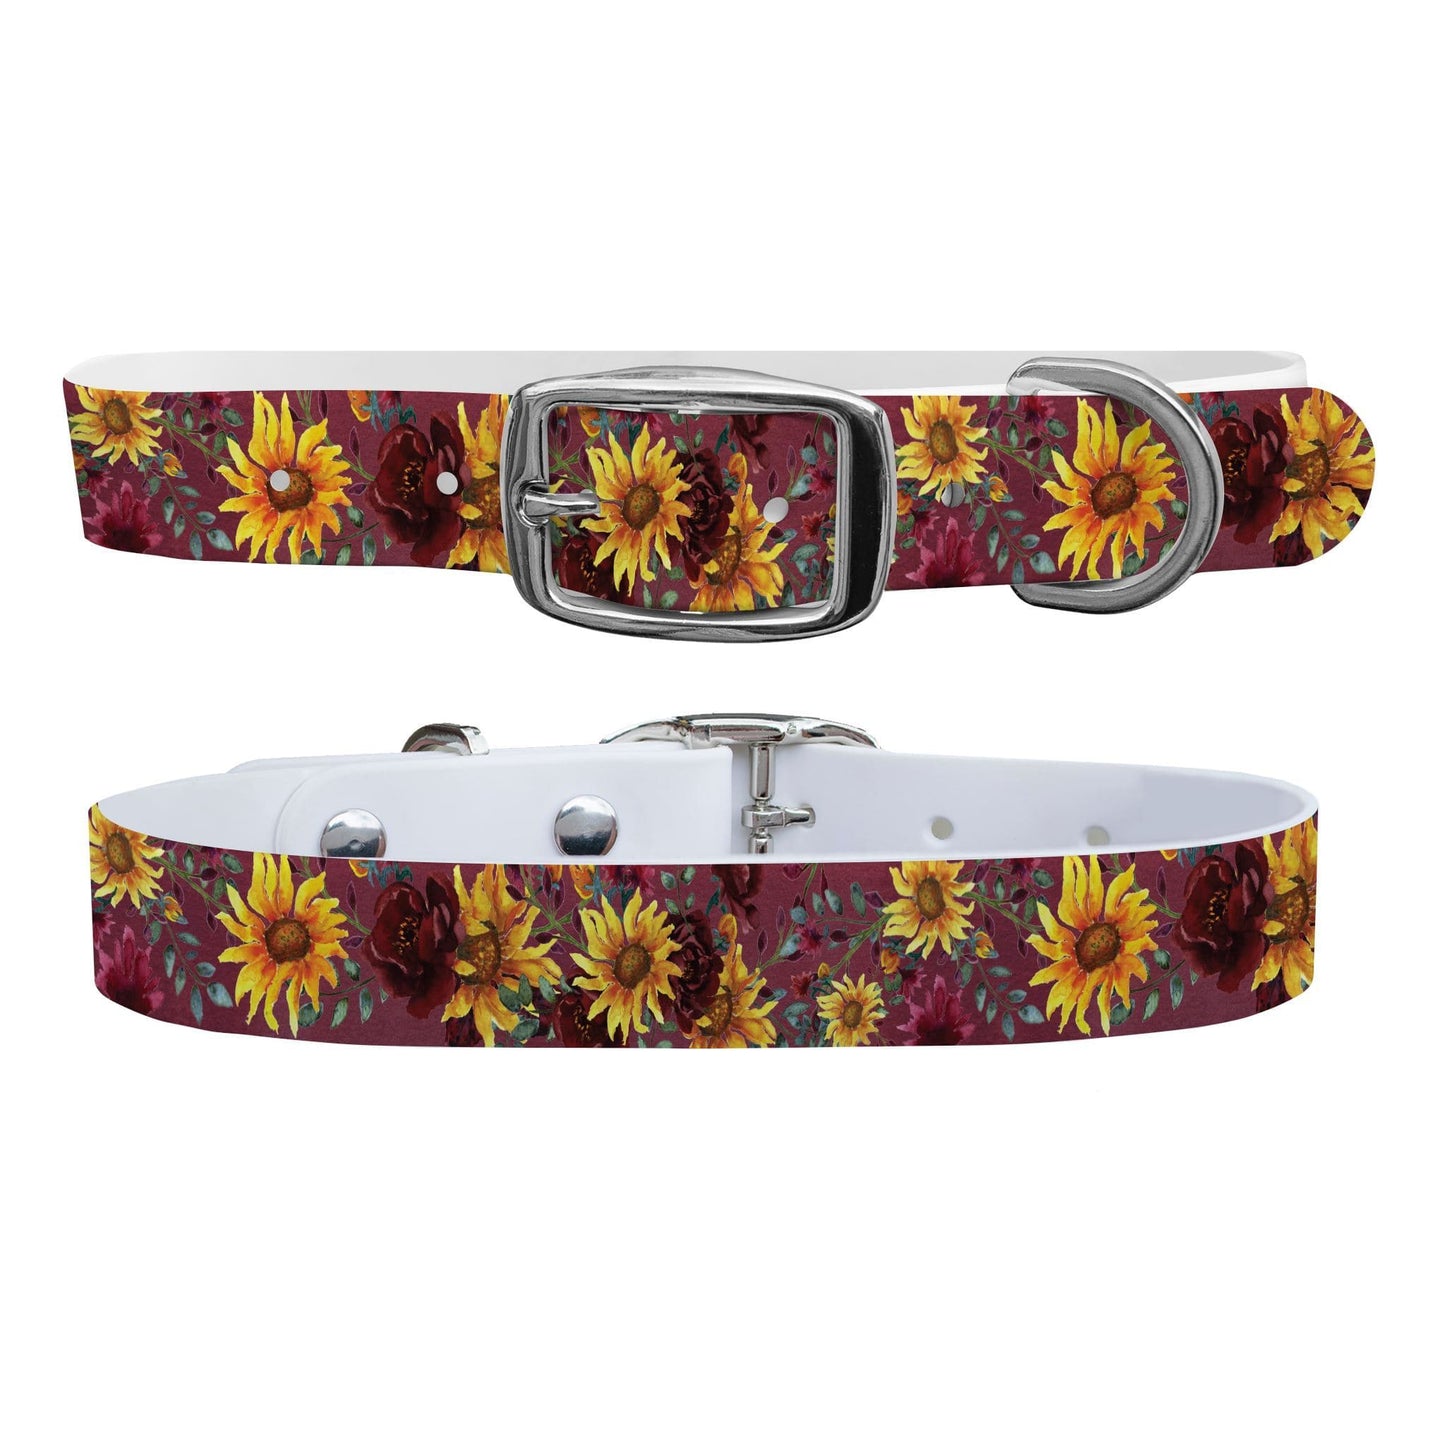 Merlot Sunflowers Dog Collar With Silver Buckle